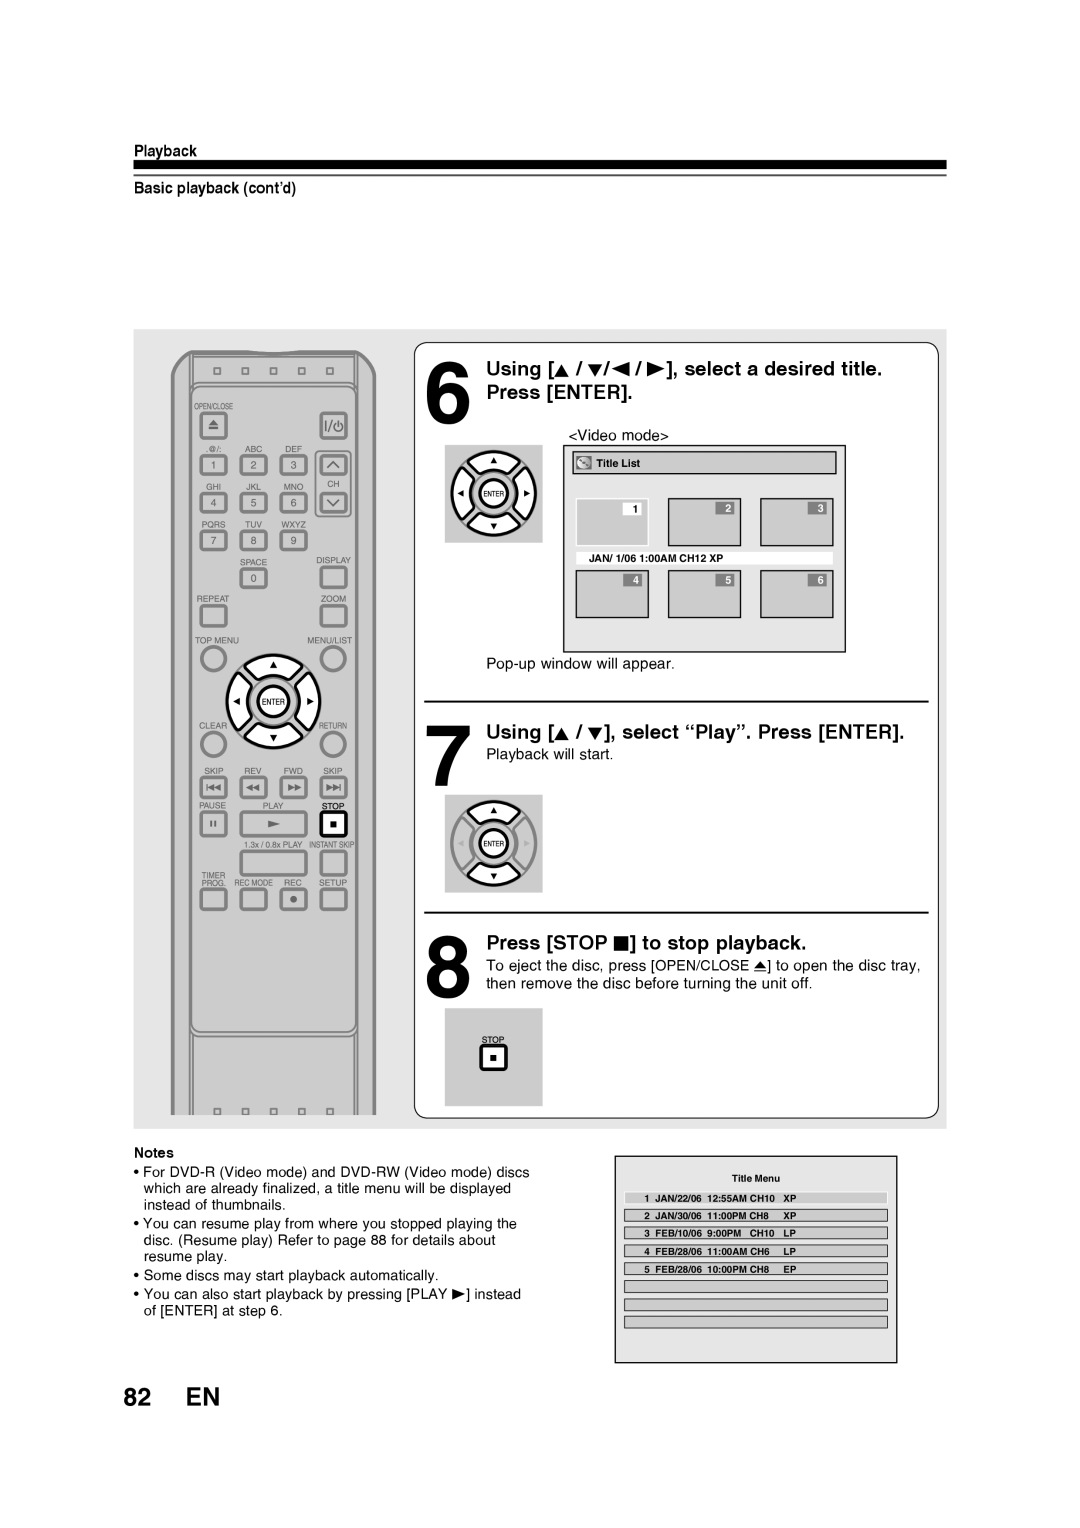 Toshiba D-RW2SU/D-RW2SC manual 82 EN, Using K / L/ / B, select a desired title Press ENTER, Press STOP C to stop playback 